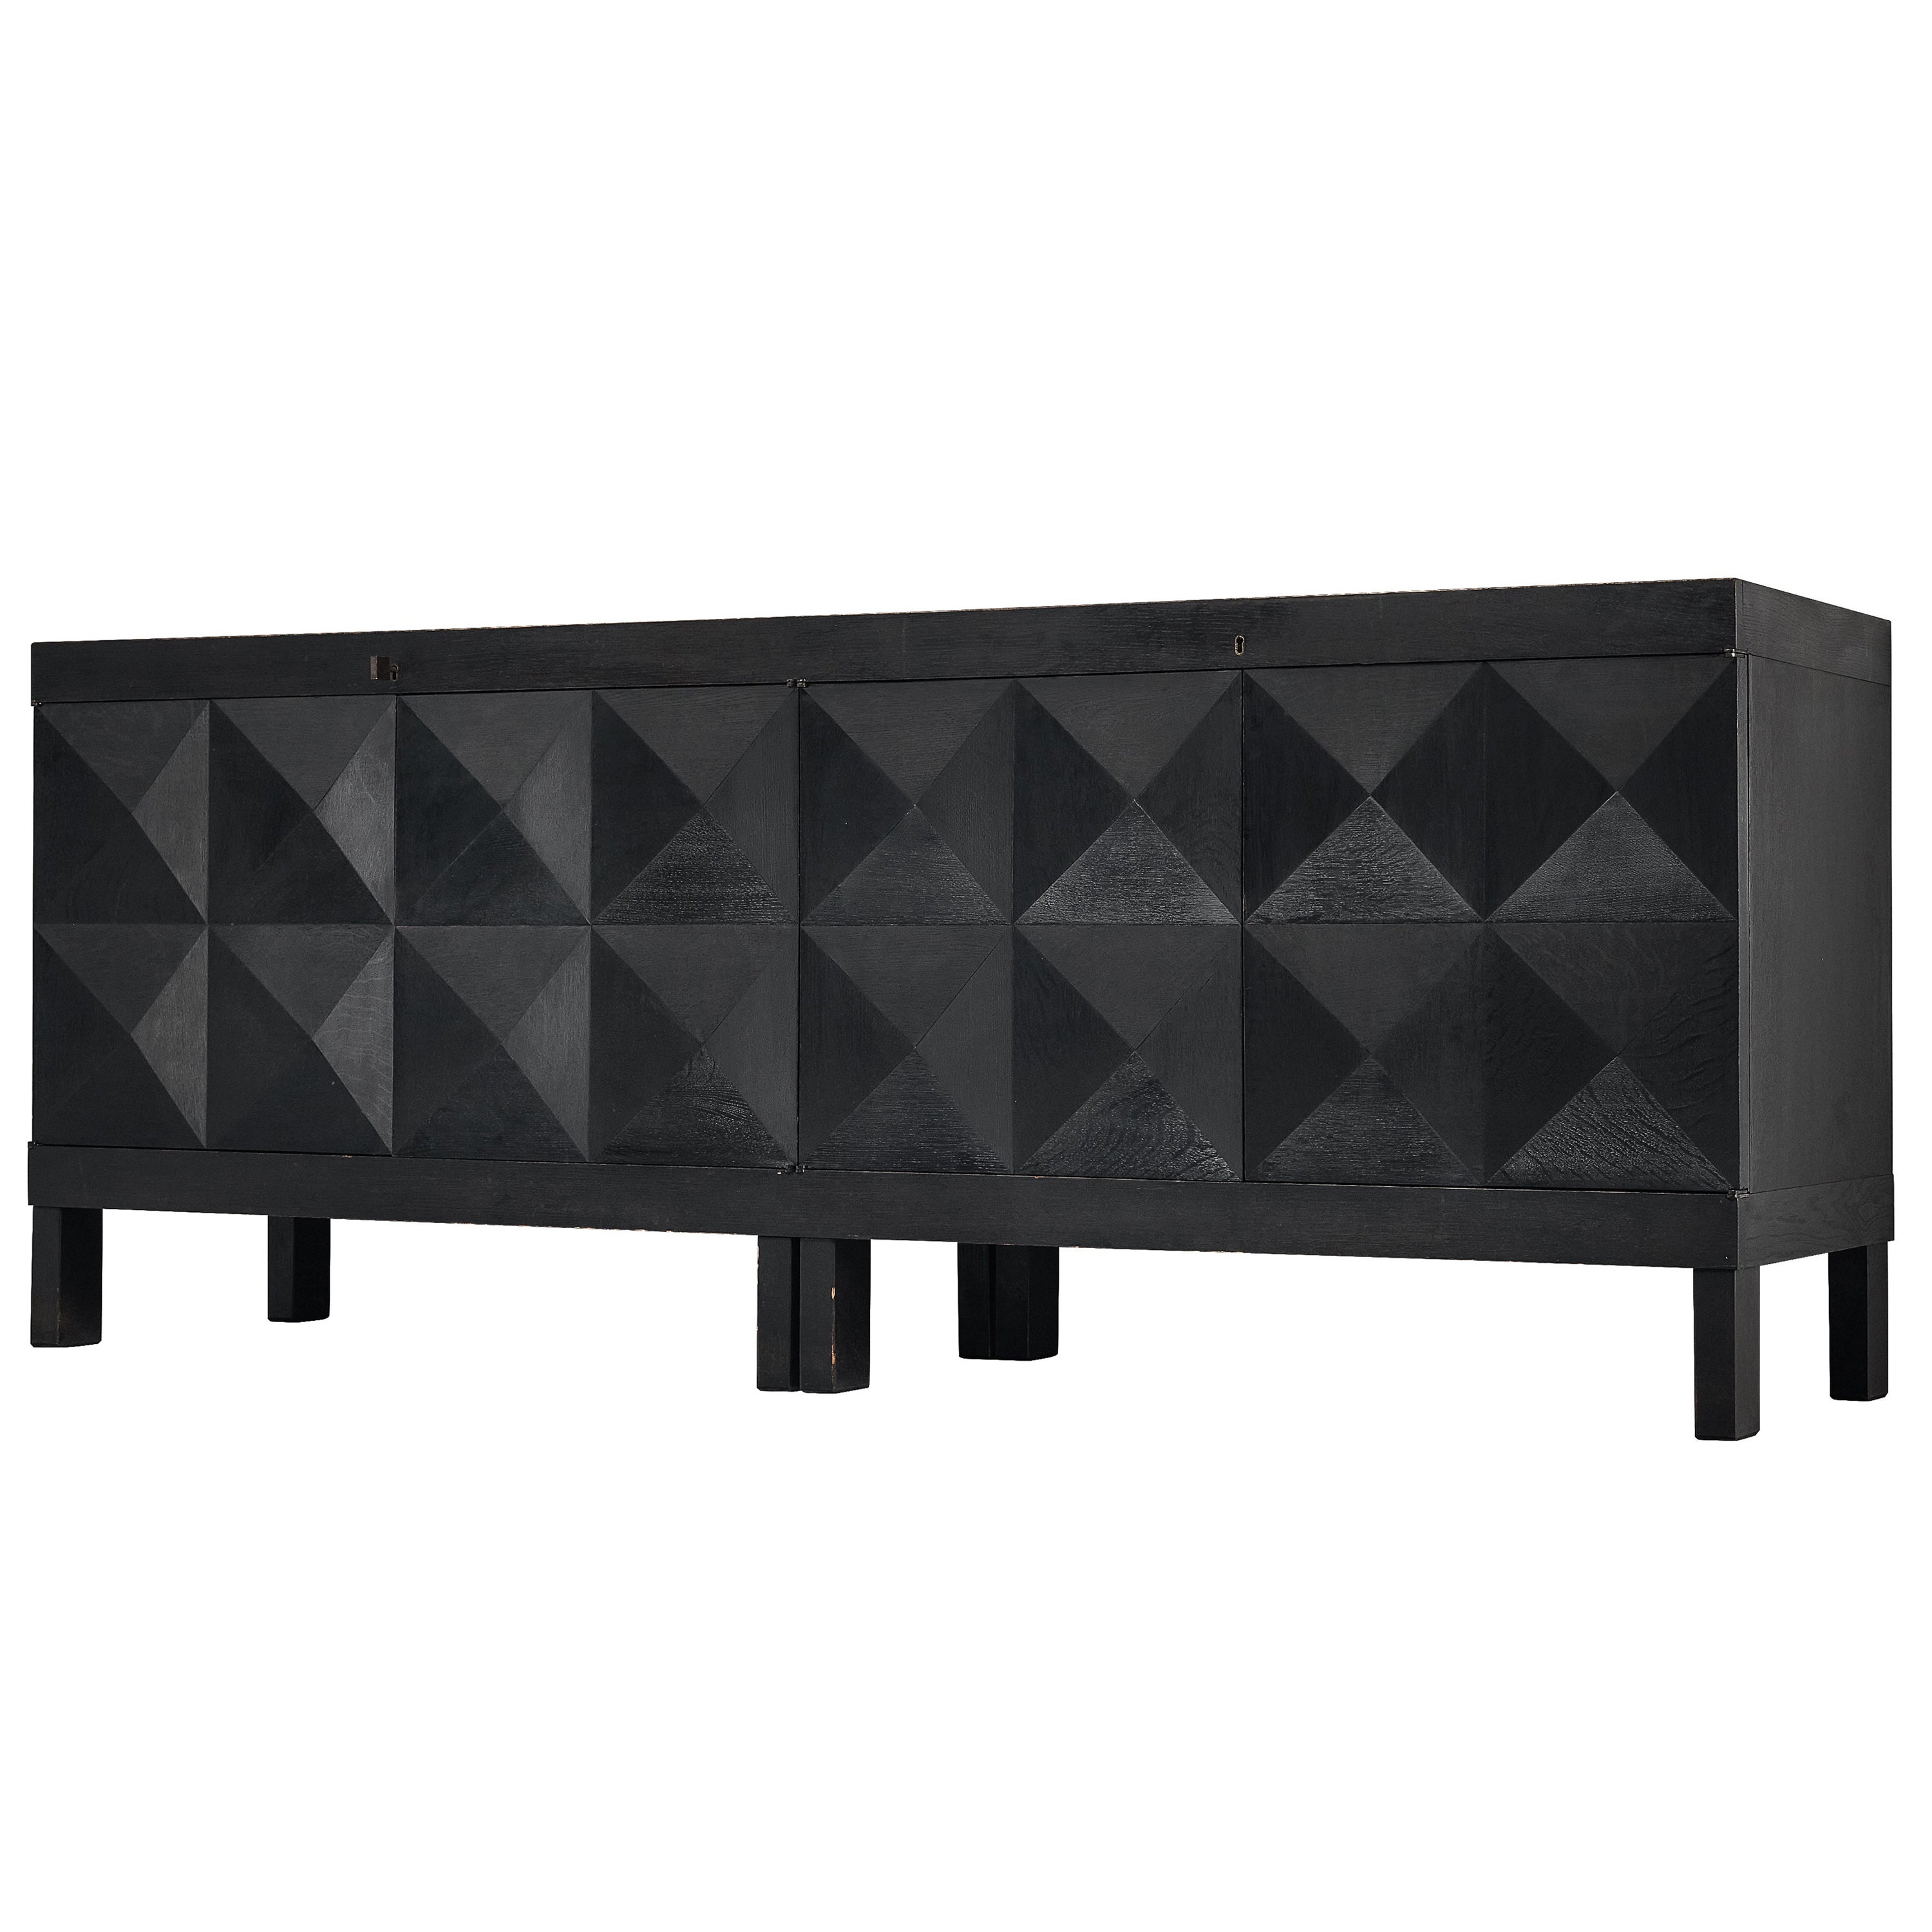 Belgian Sideboard in Black Stained Oak with Graphical Doors